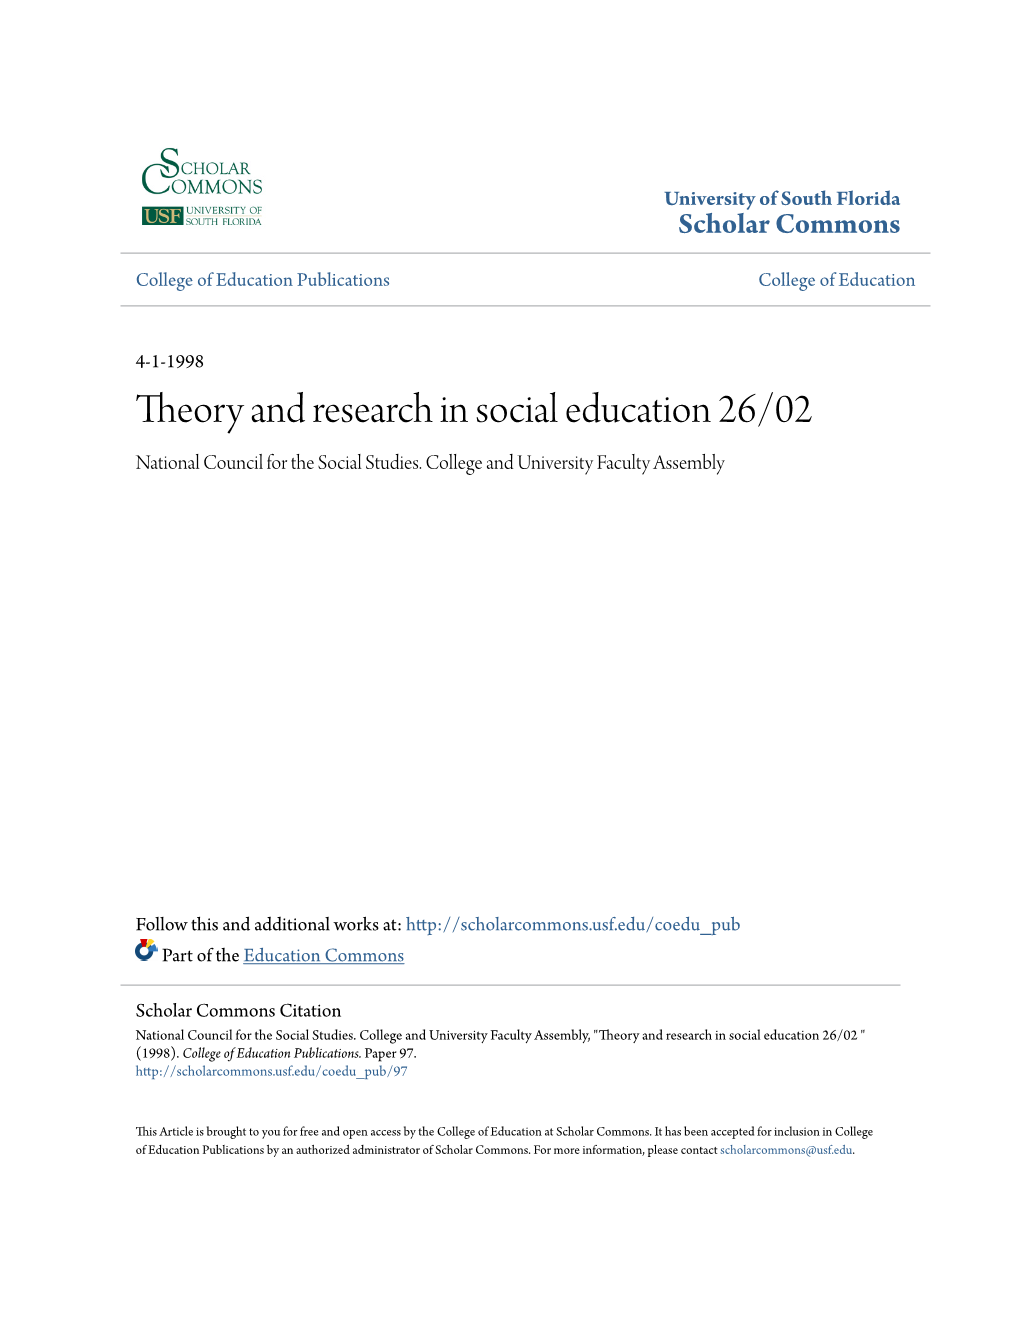 Theory and Research in Social Education 26/02 National Council for the Social Studies